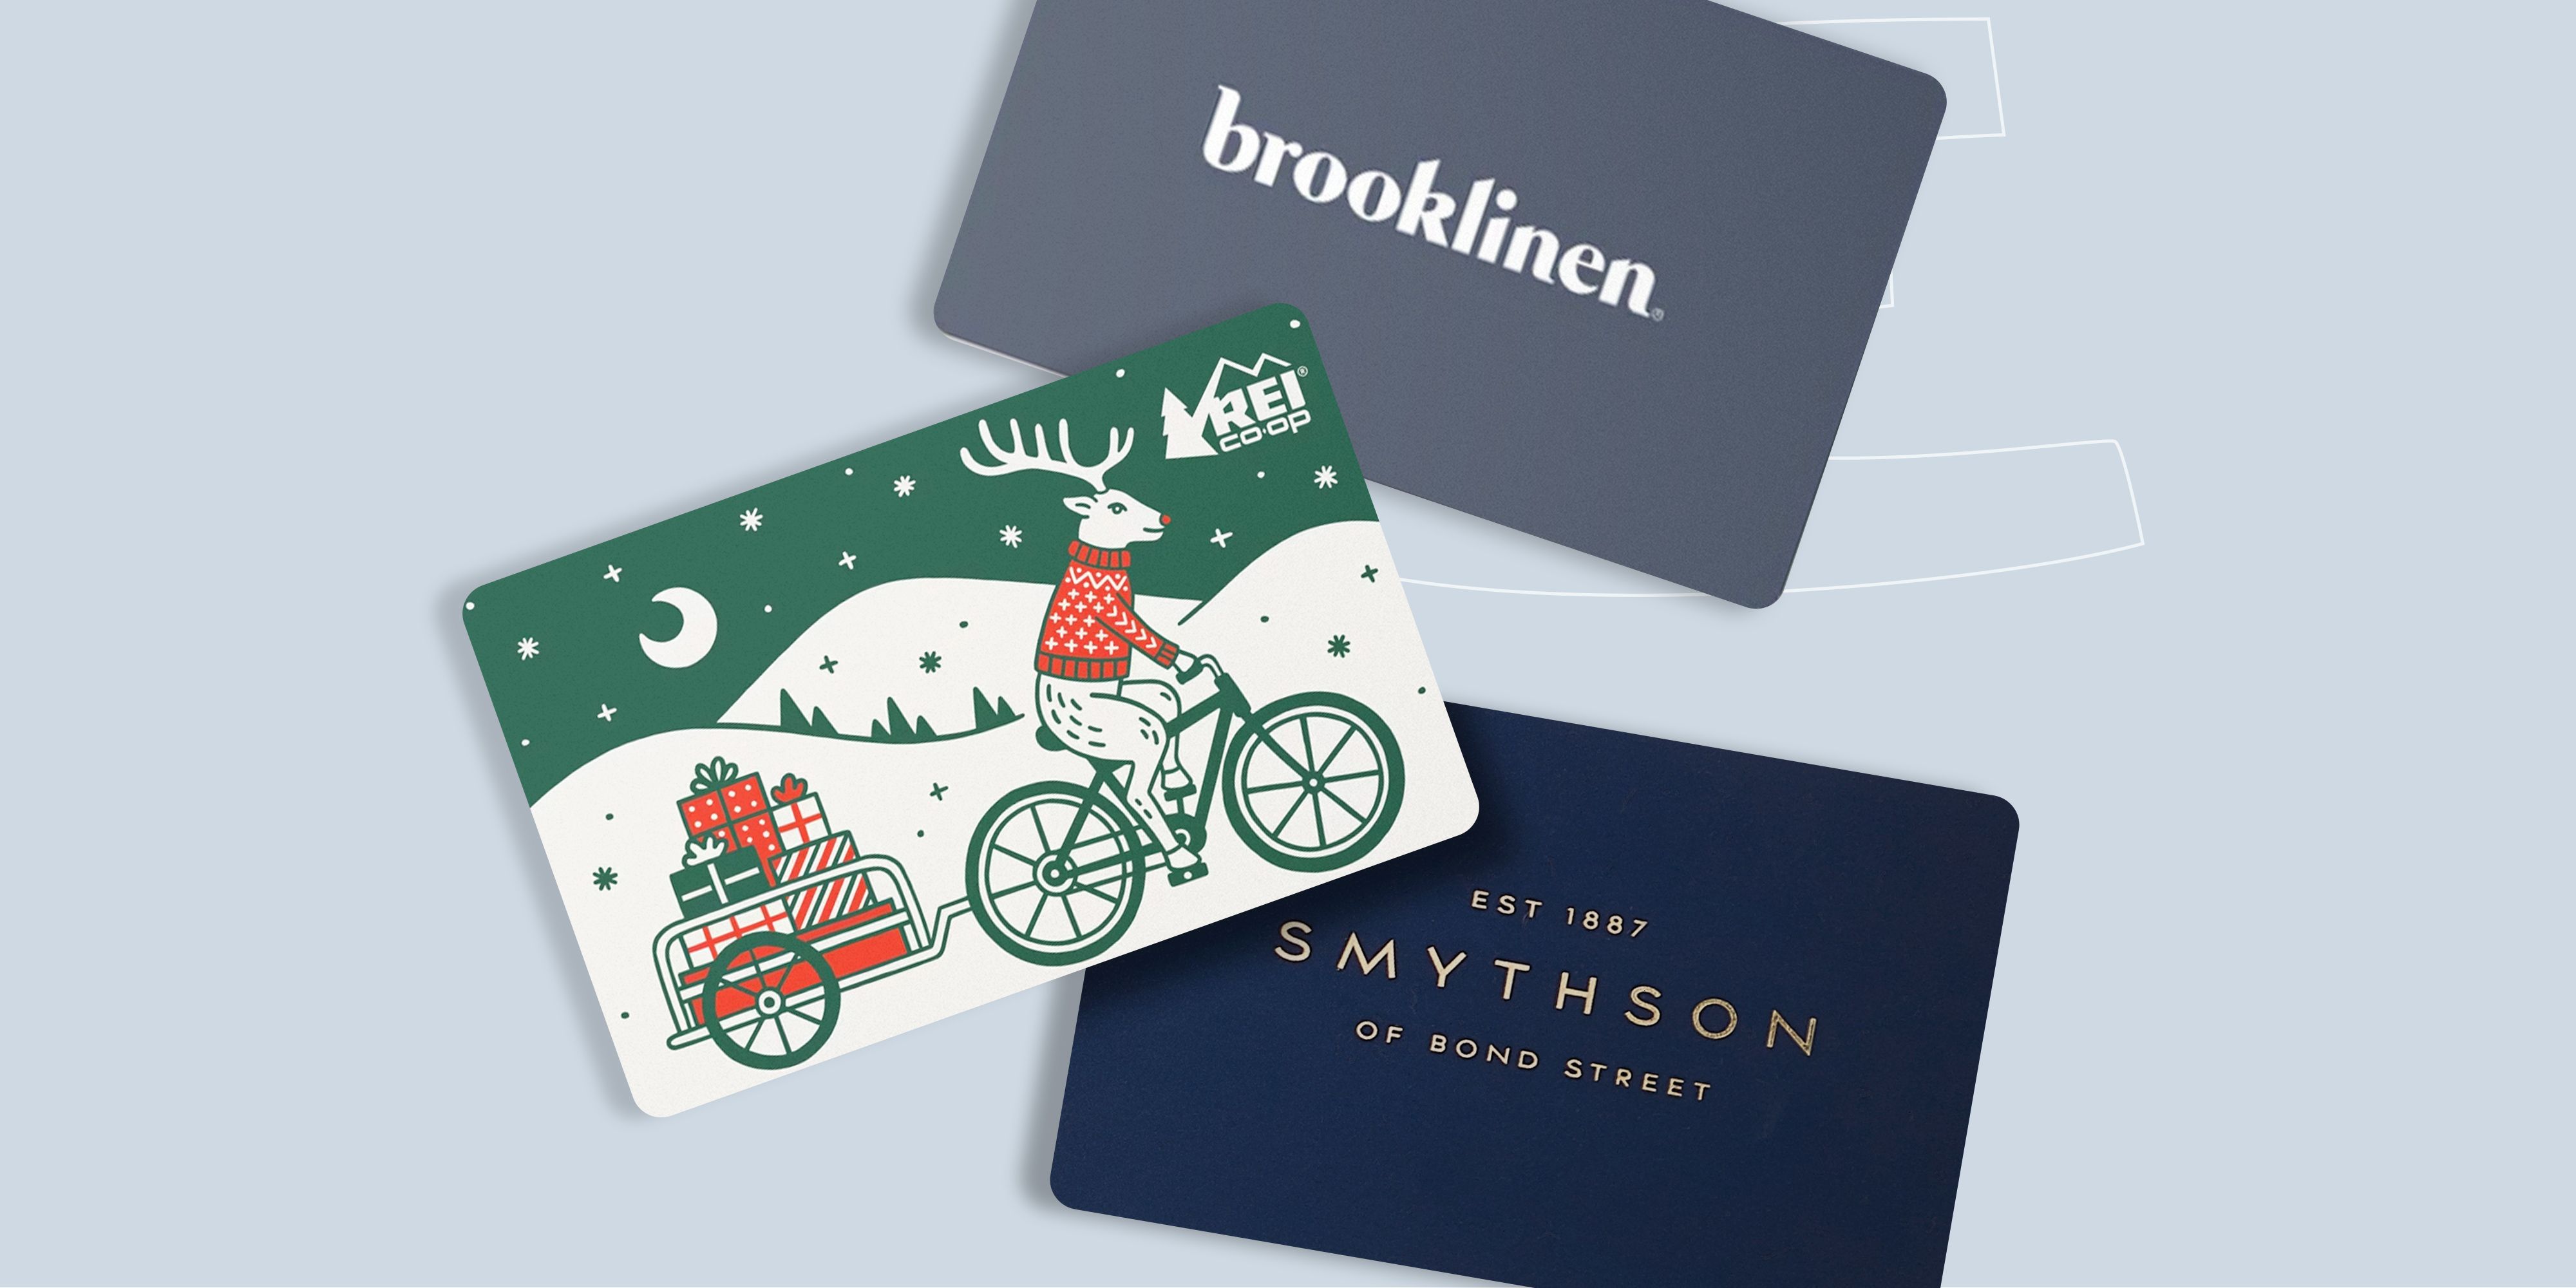 15 Best Gift Cards for a Home Cook or Foodie in 2023 - CNET